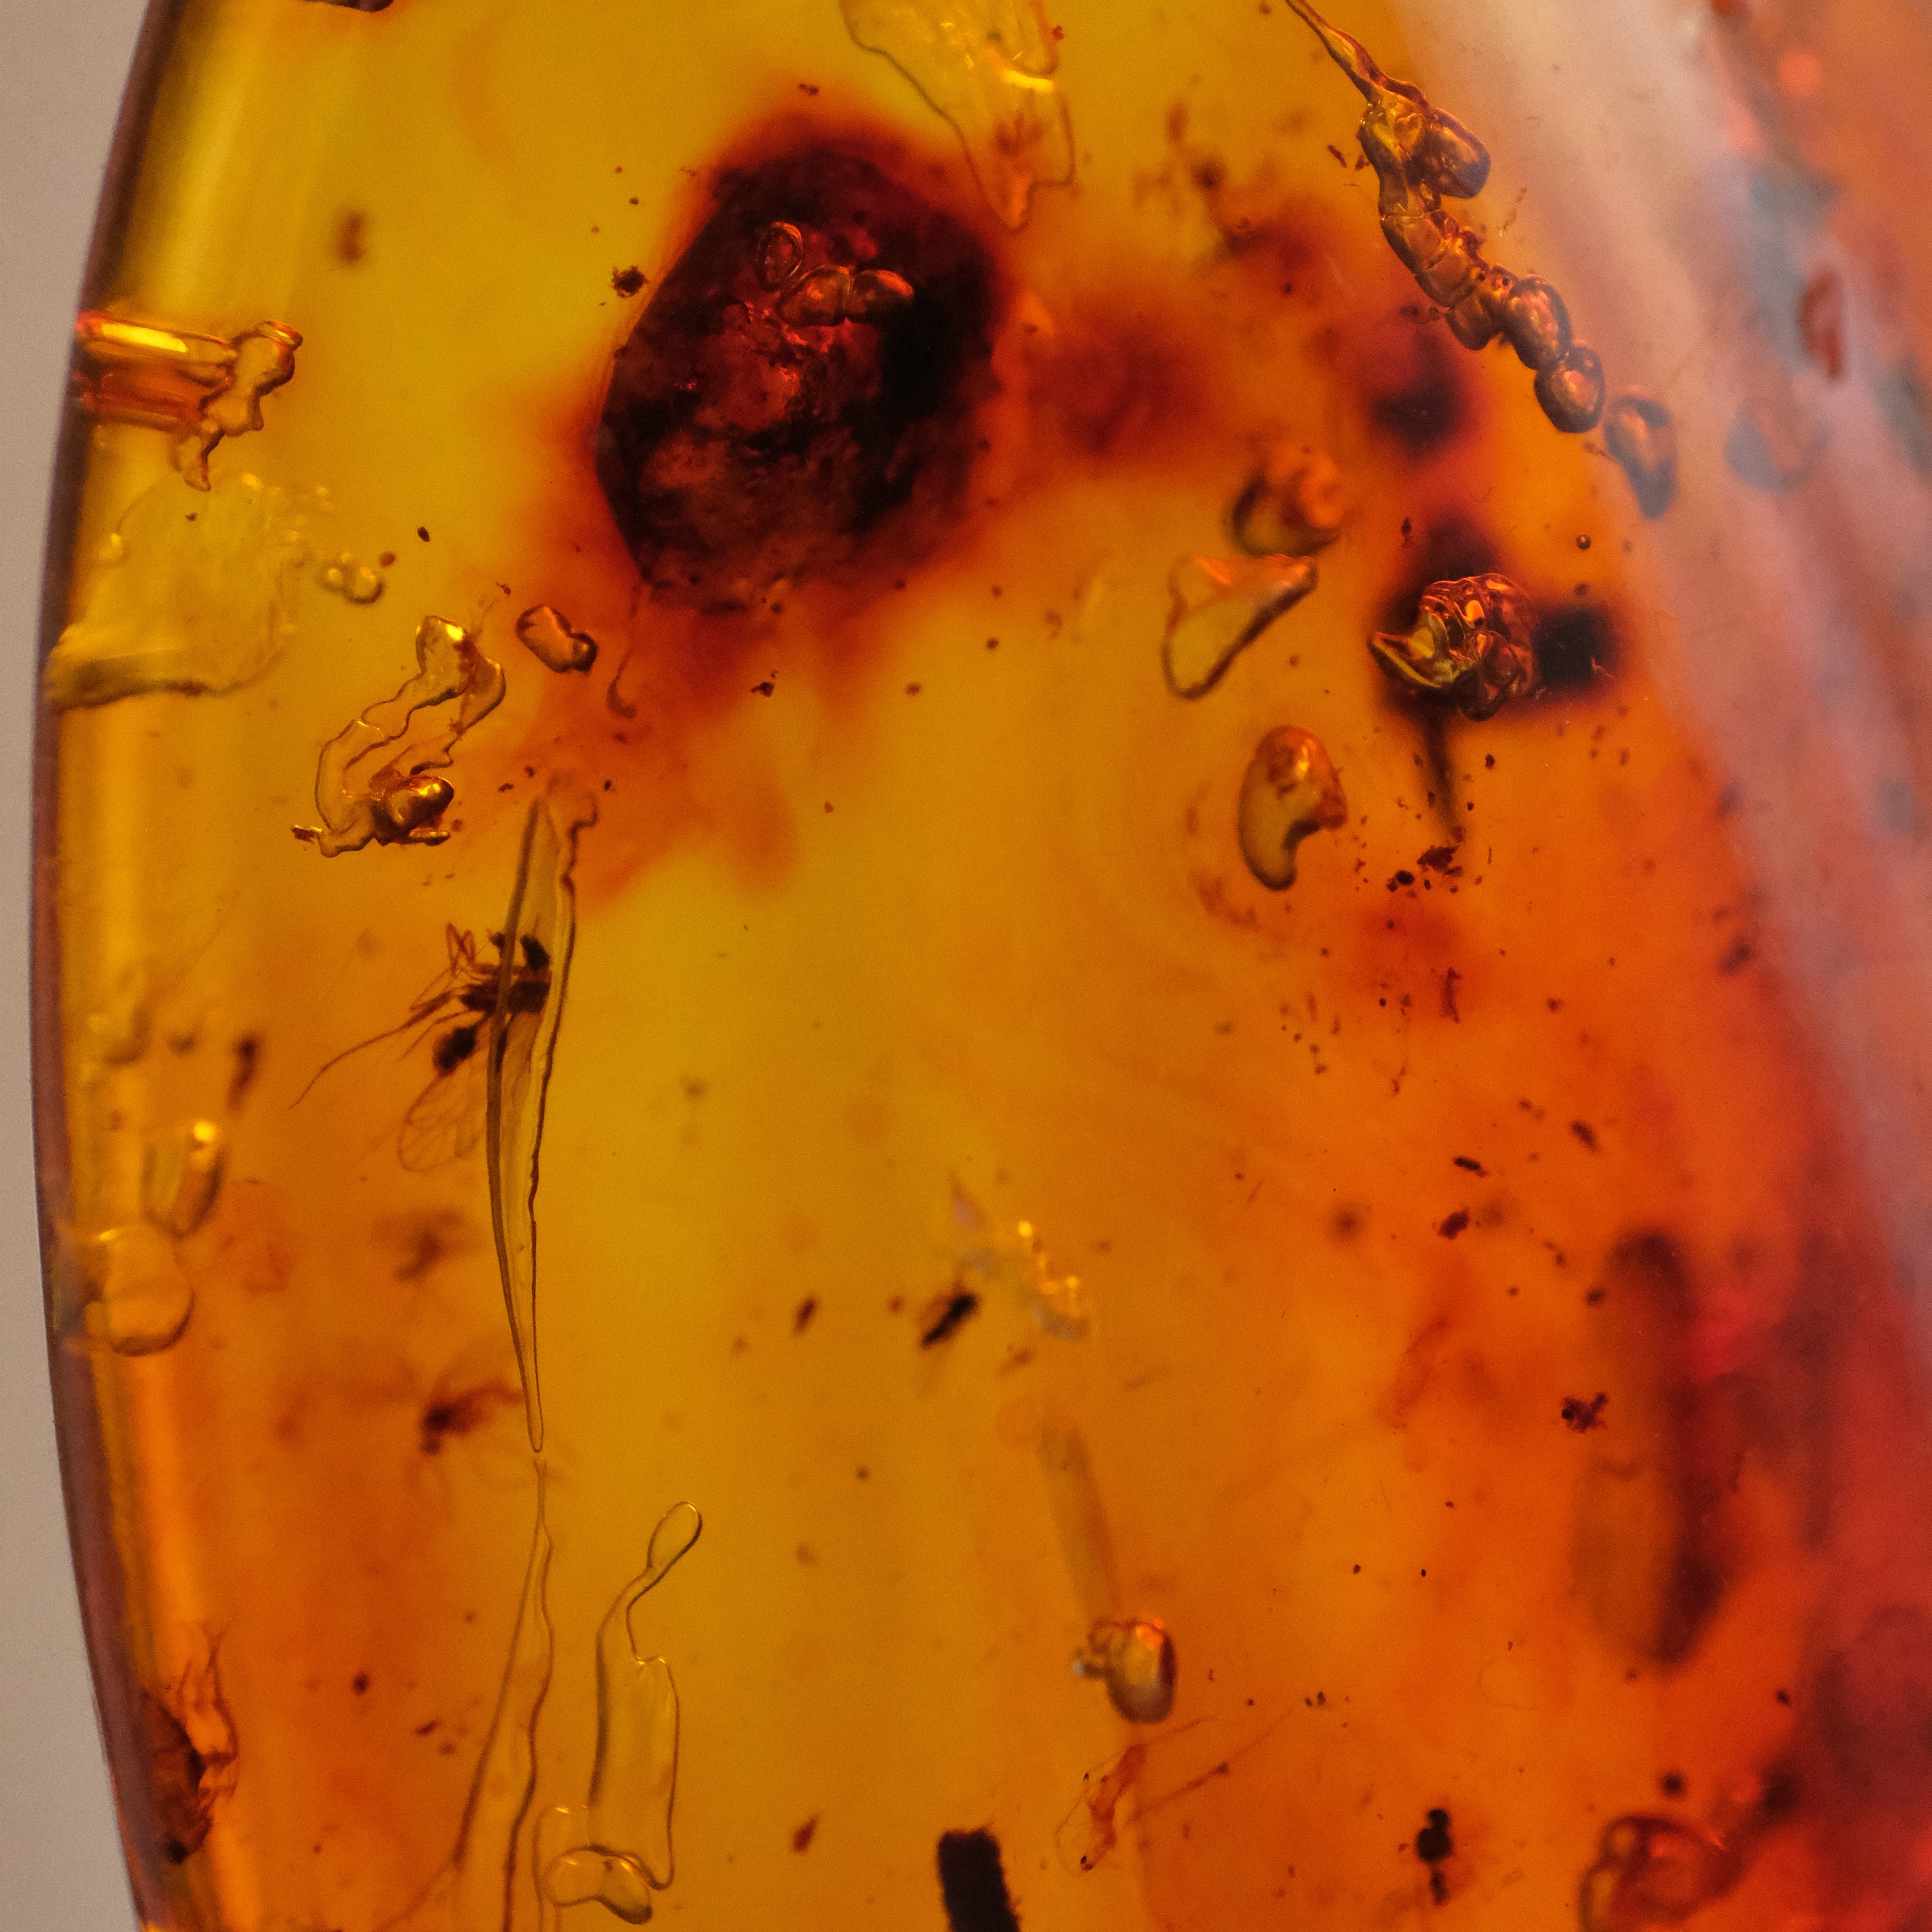 Colombian Amber Specimen with Trapped Insects